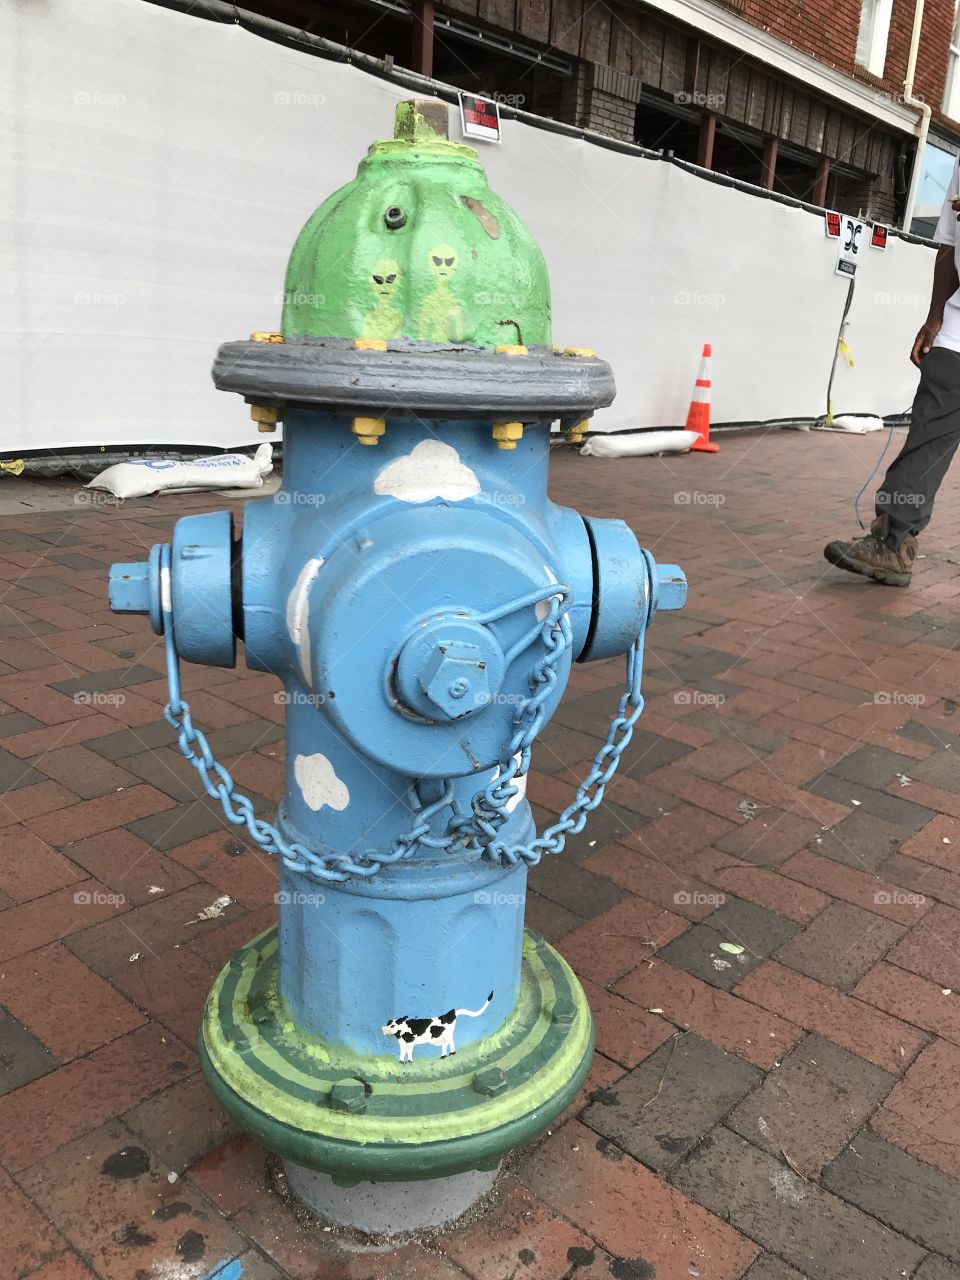 Whimsically painted fire hydrant in downtown Athens, Georgia. Painted sky blue with clouds, aliens in the sky, and a cow on the ground. Beam me up!